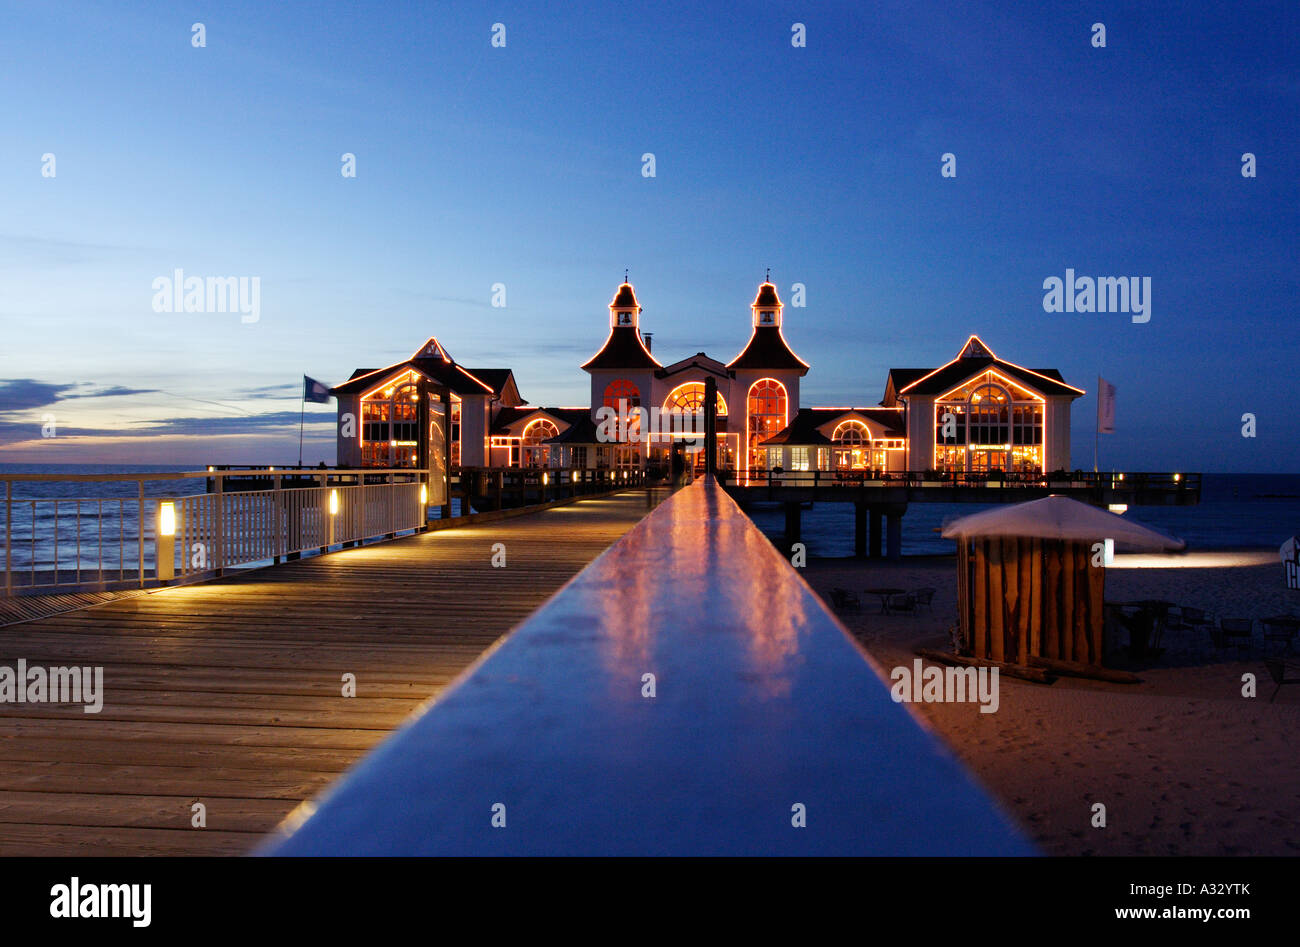 The pier in Sellin in the evening, Germany Stock Photo